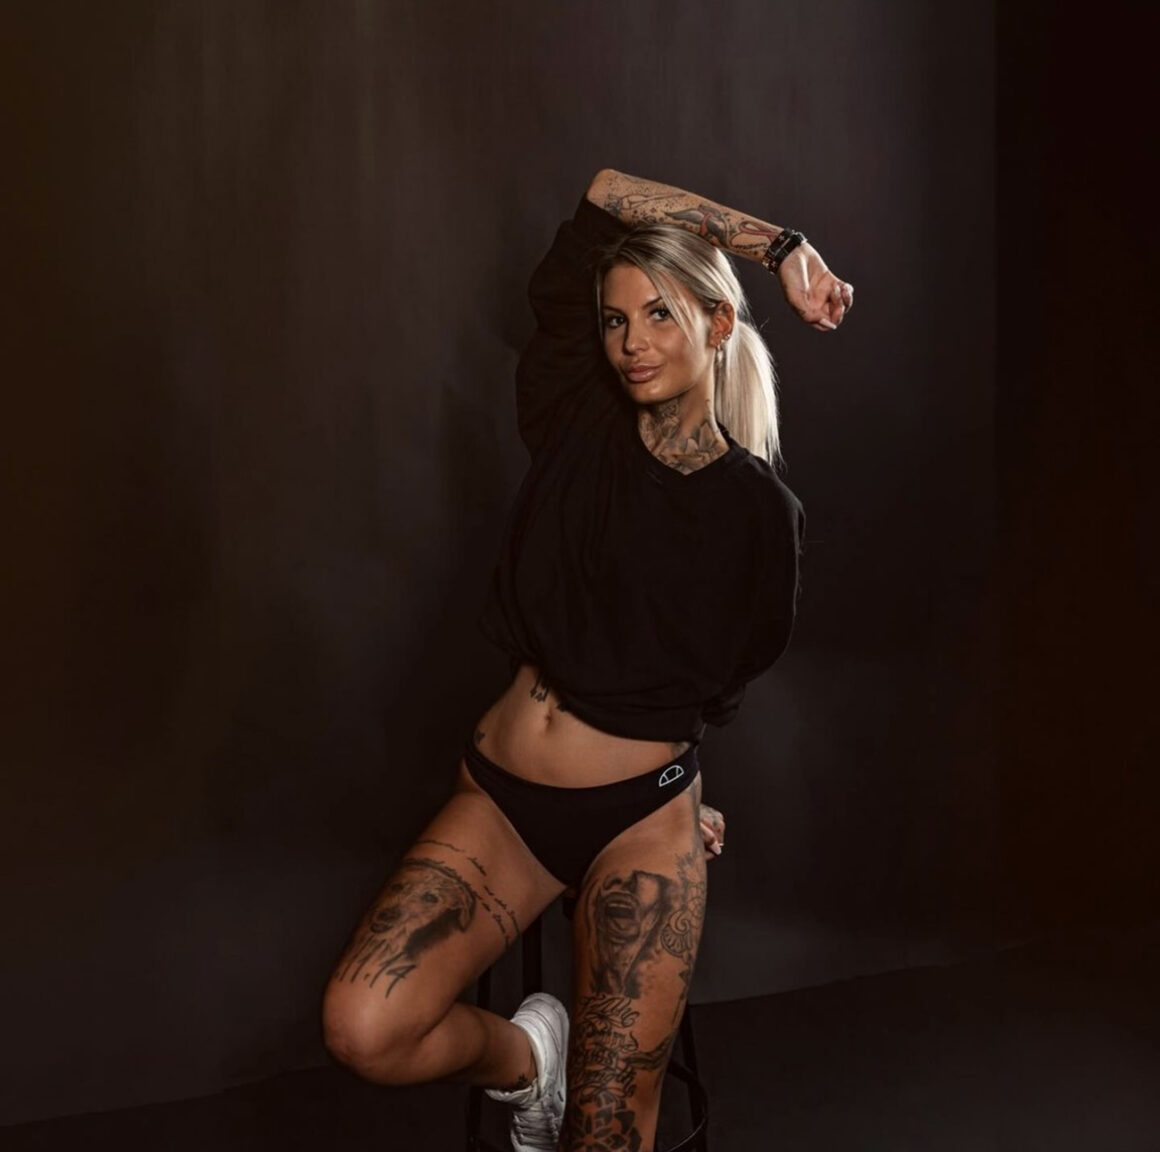 Sarah Bieger, tattoo model, Photos by Max Blanke